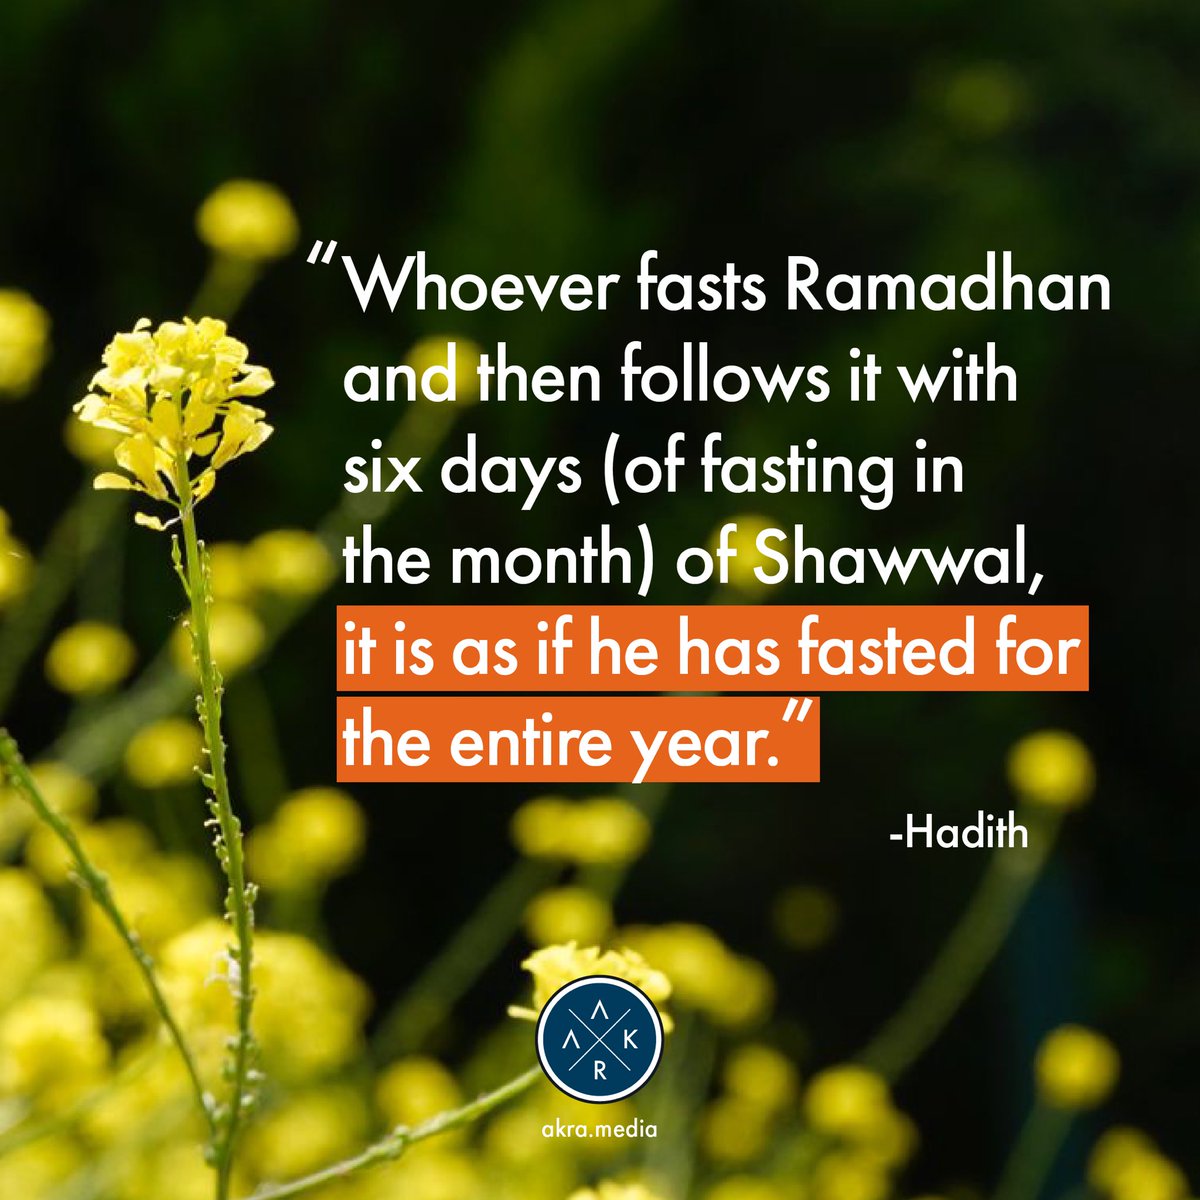 “Whoever fasts Ramadhan and then follows it with six days (of fasting in the month) of Shawwal, it is as if he has fasted for the entire year.”
-Hadith

#hadith #fasting #monthofshawwal #shawwal #ramadhan #habits #muslimlifestyle #i̇slam #faith #gooddeeds